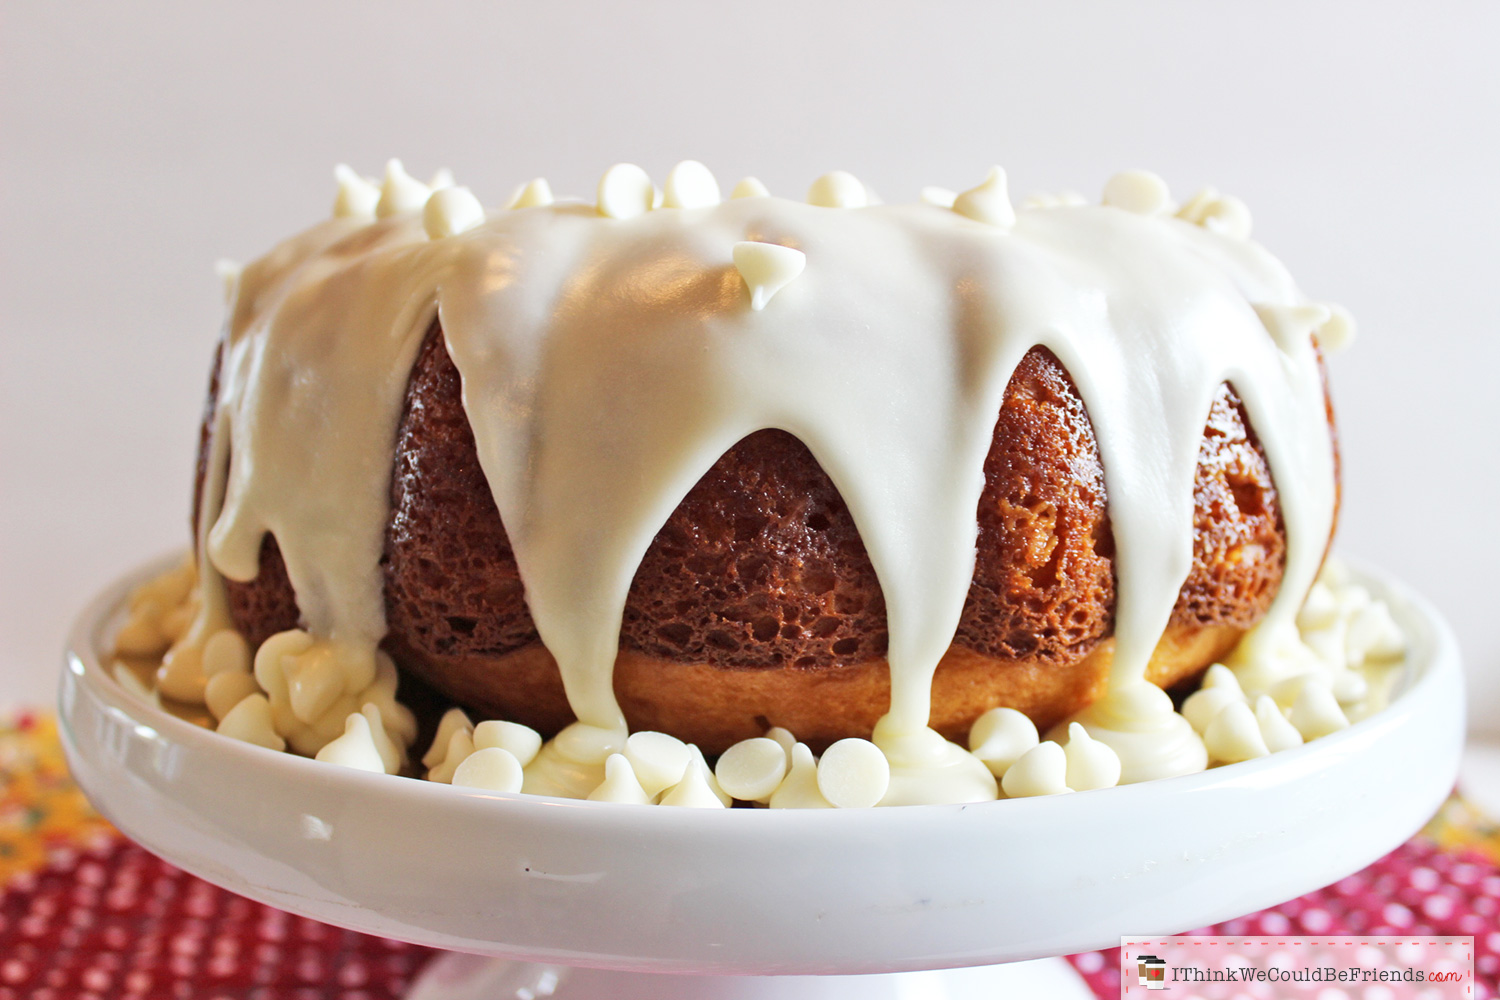 This the BEST & EASIEST White Chocolate Vanilla Bundt Cake recipe that you'll ever try! It starts with a yellow boxed cake mix, BUT then you add sour cream and a pudding mix, it looks FANCY and tastes MOIST and INCREDIBLE! Your guests will rave and will ask for the recipe (so bring copies!) #white #chocolate #vanilla #bundt #cake #recipe #mix #yellow #best #easy #quick #moist